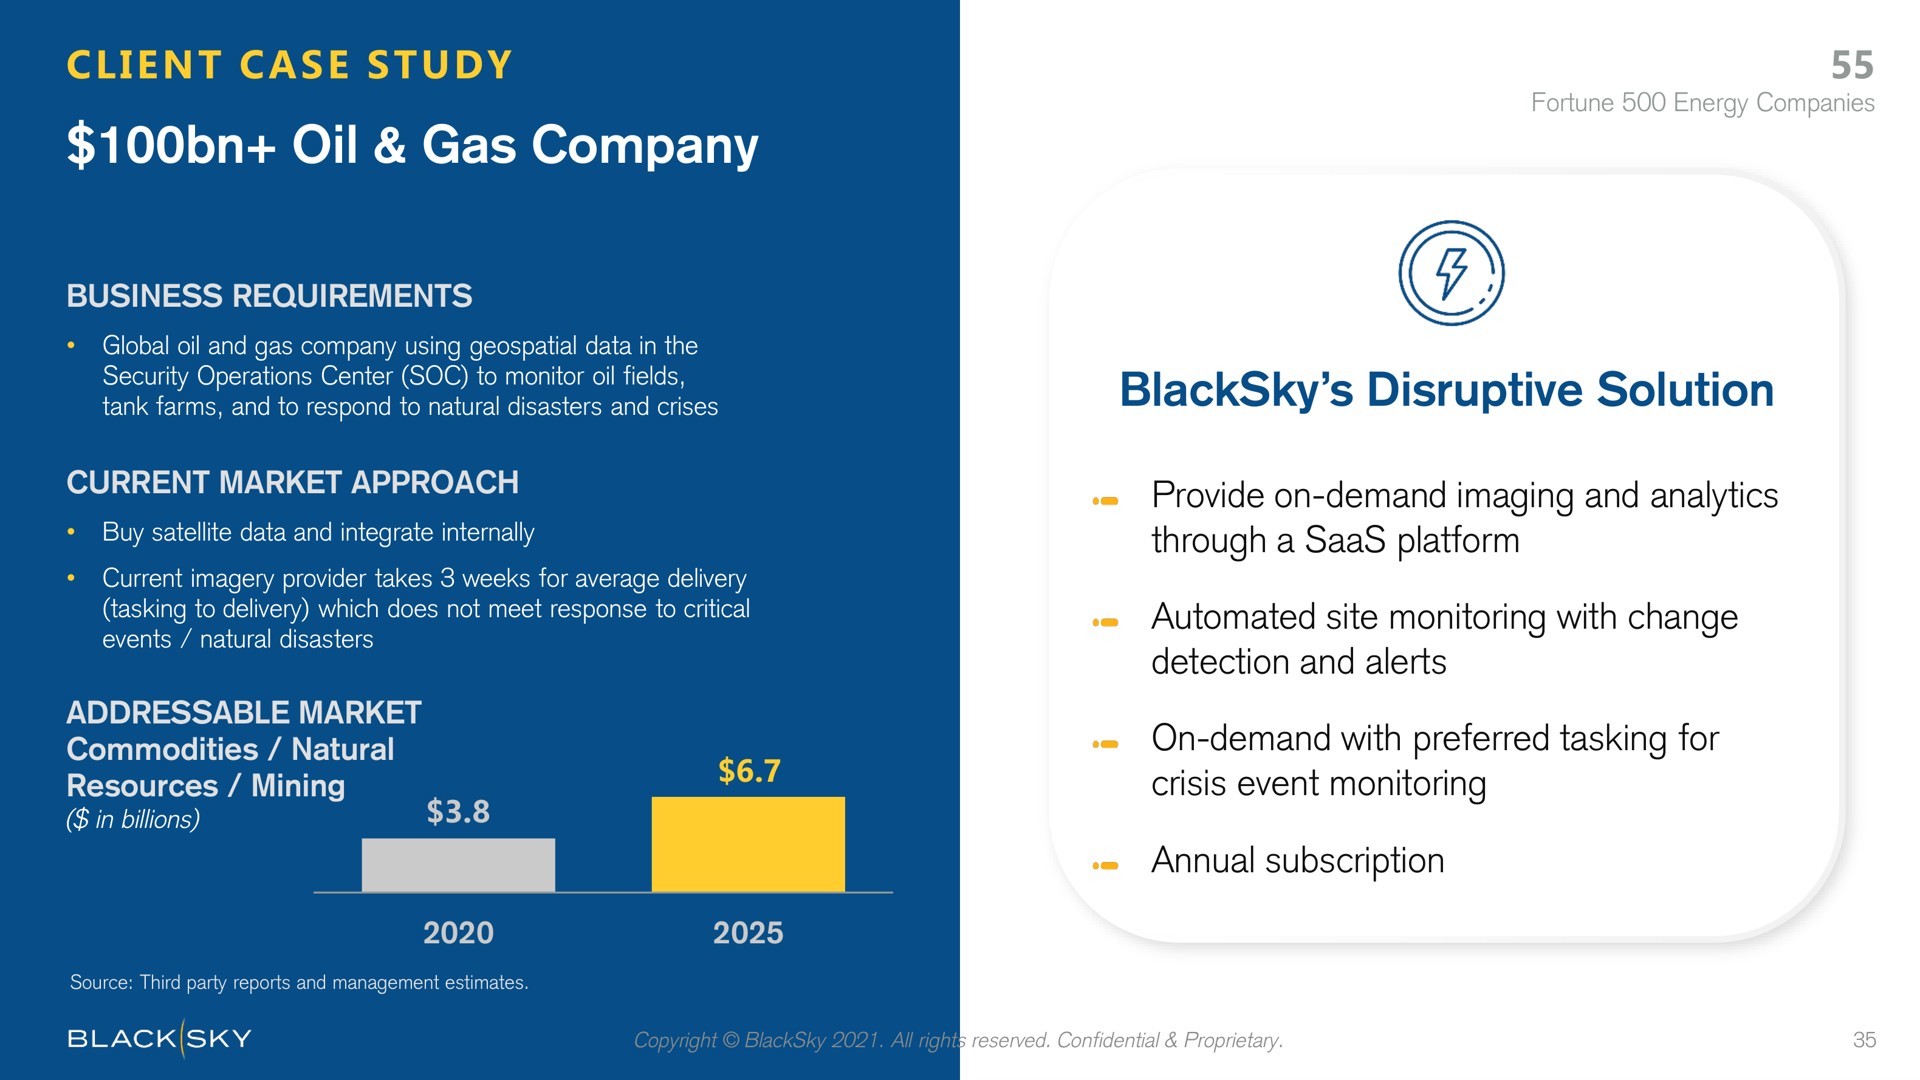 oil gas company disruptive solution business requirements | BlackSky